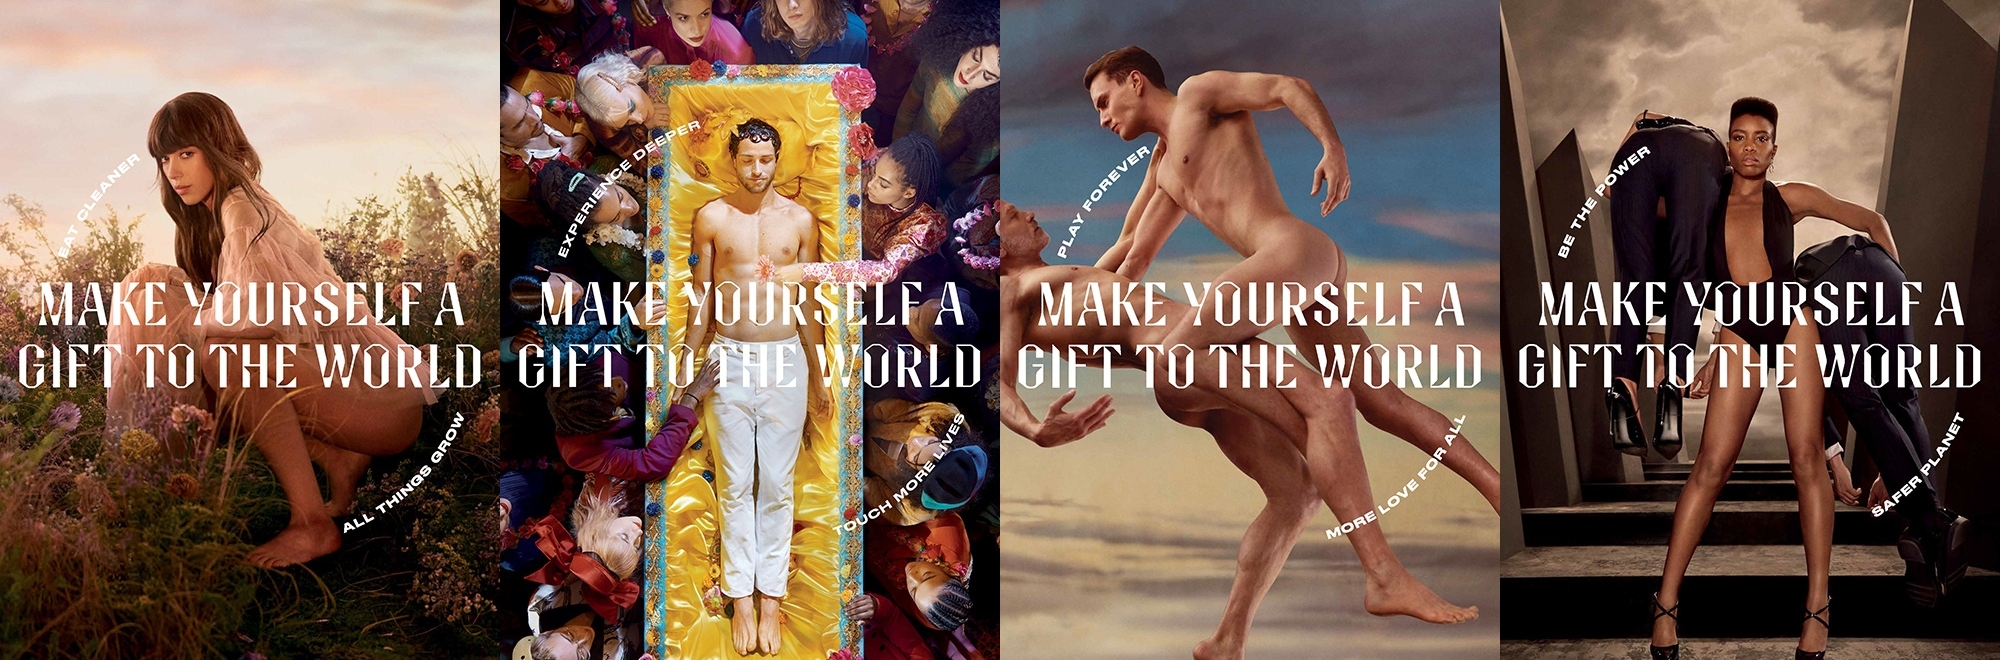 Droga5 and Equinox unveil “Make yourself a gift to the world” campaign